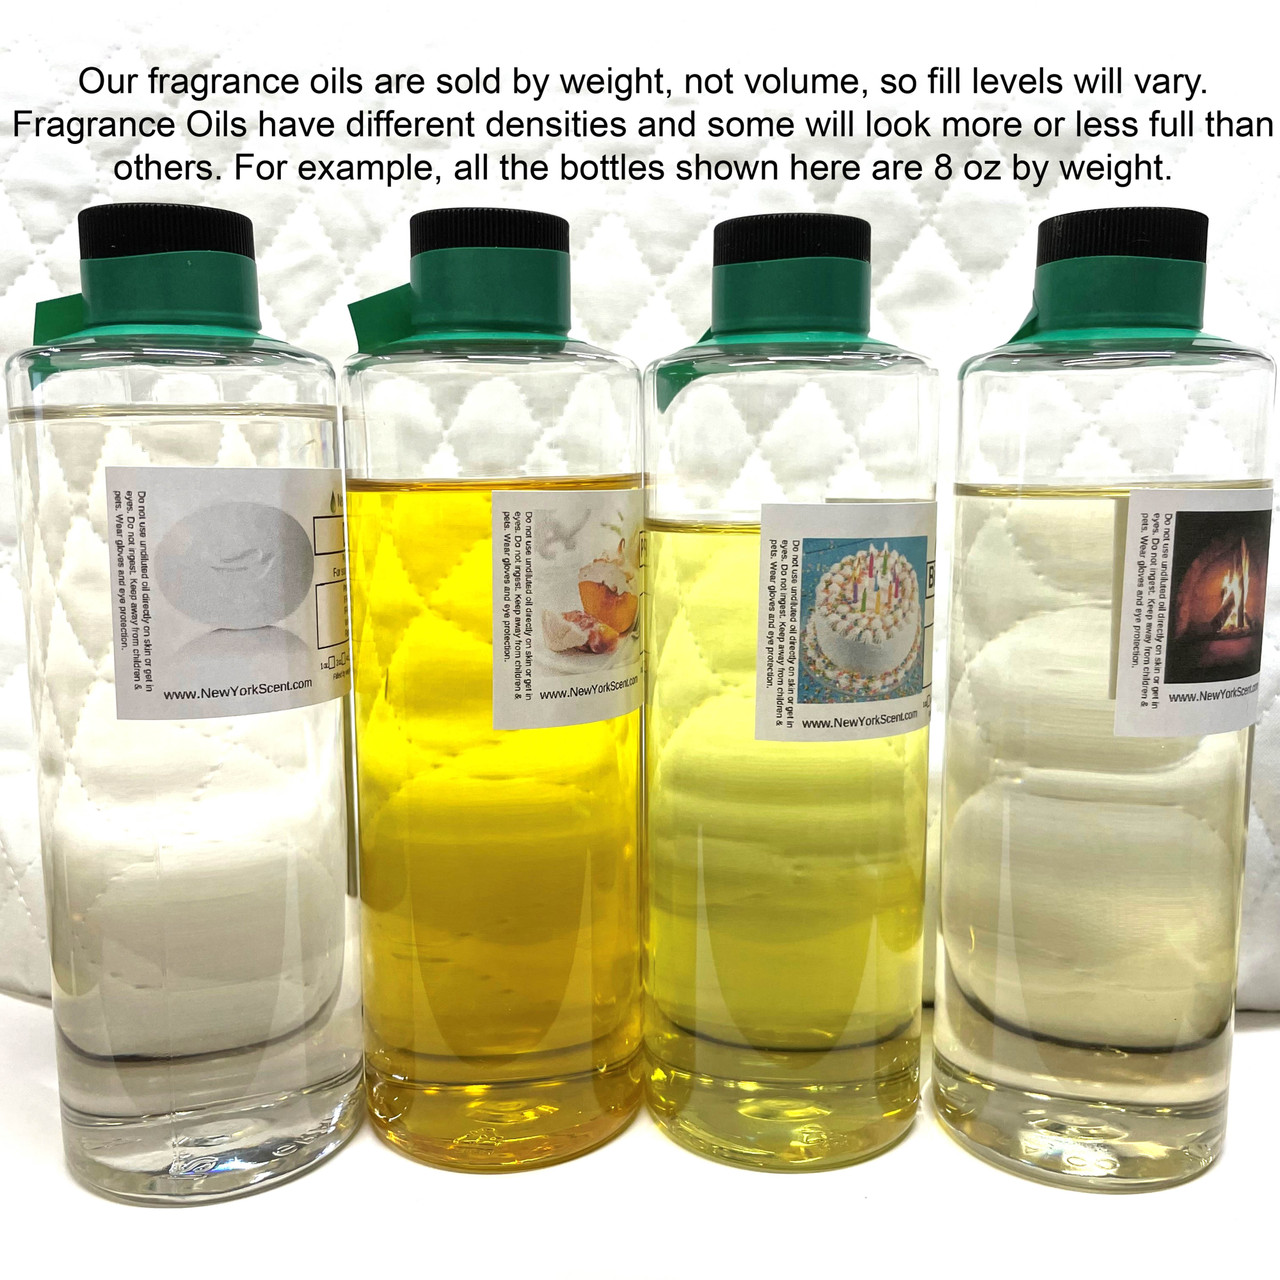 Wholesale Fragrance Oils for Candle Making and More